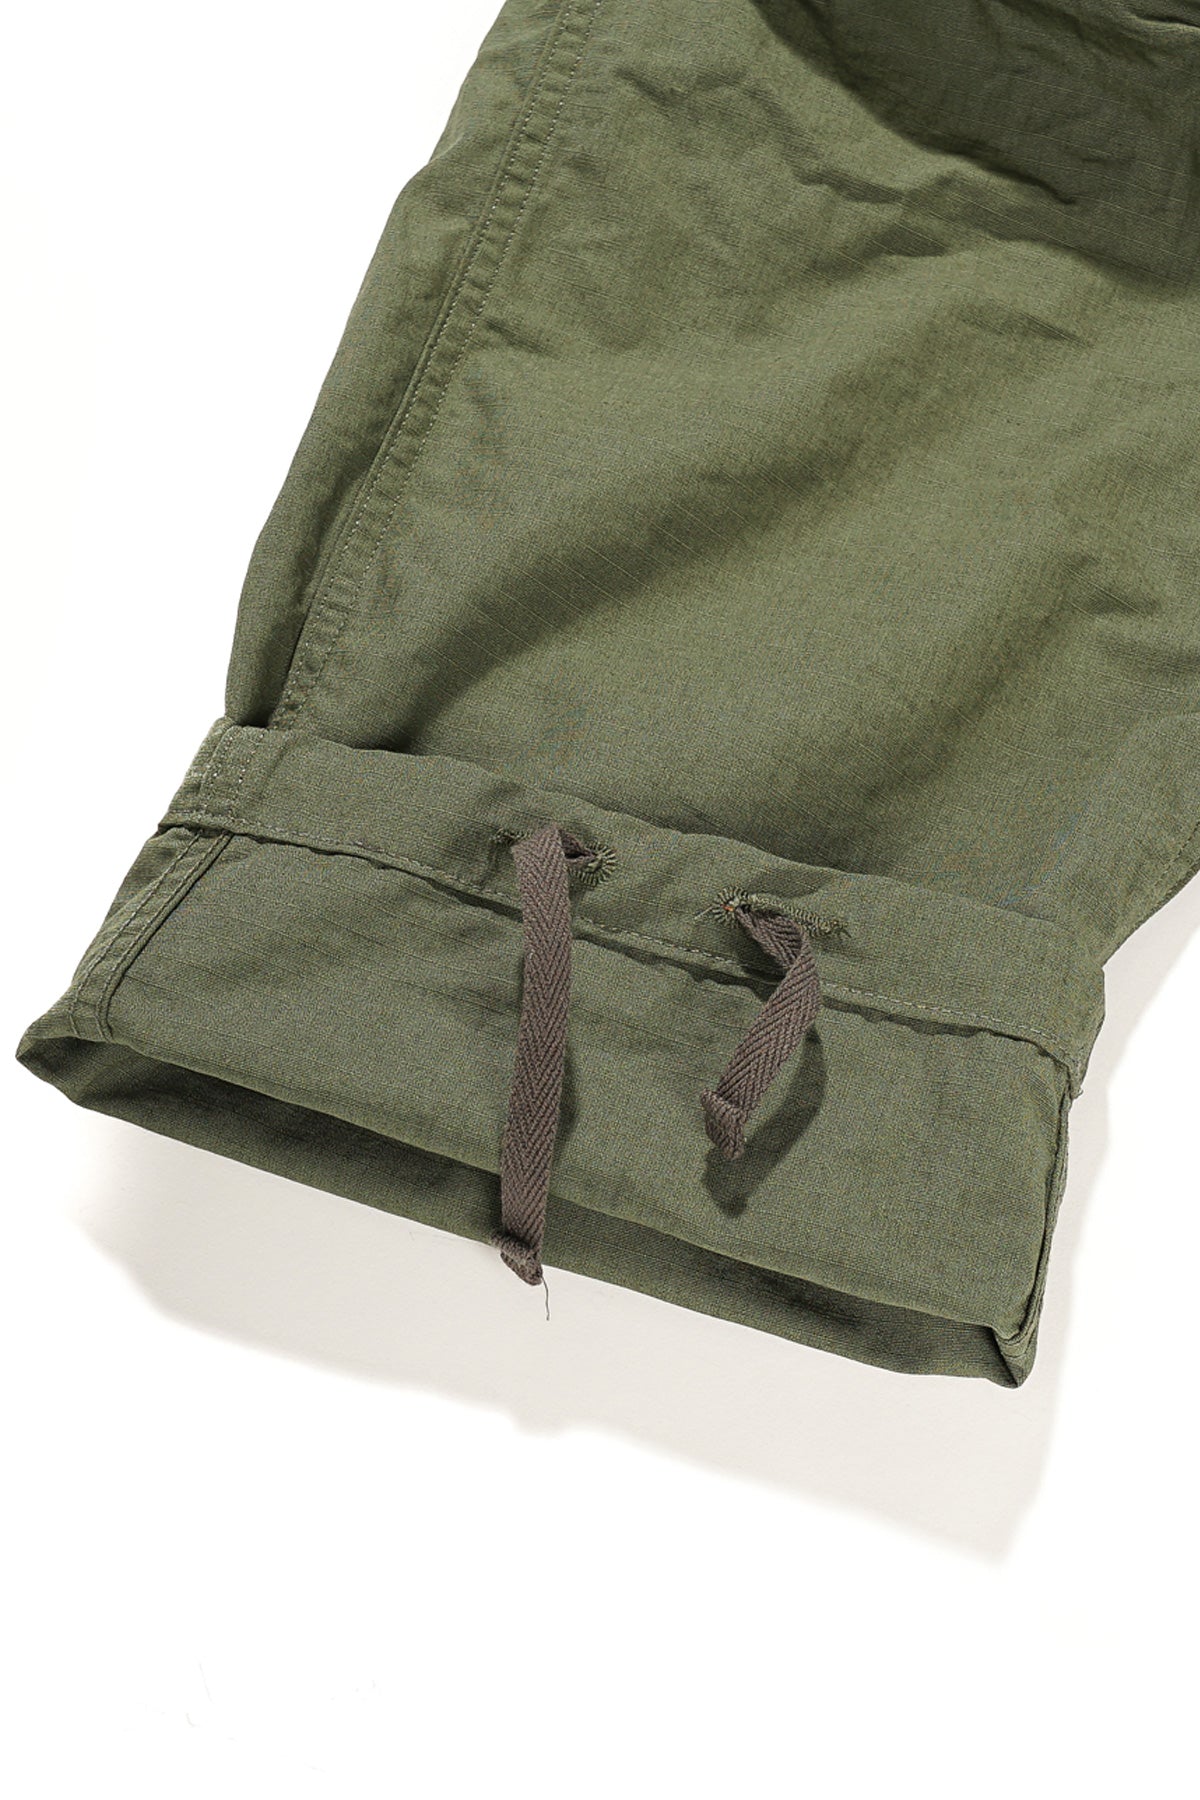 FA Pant - Olive Cotton Ripstop